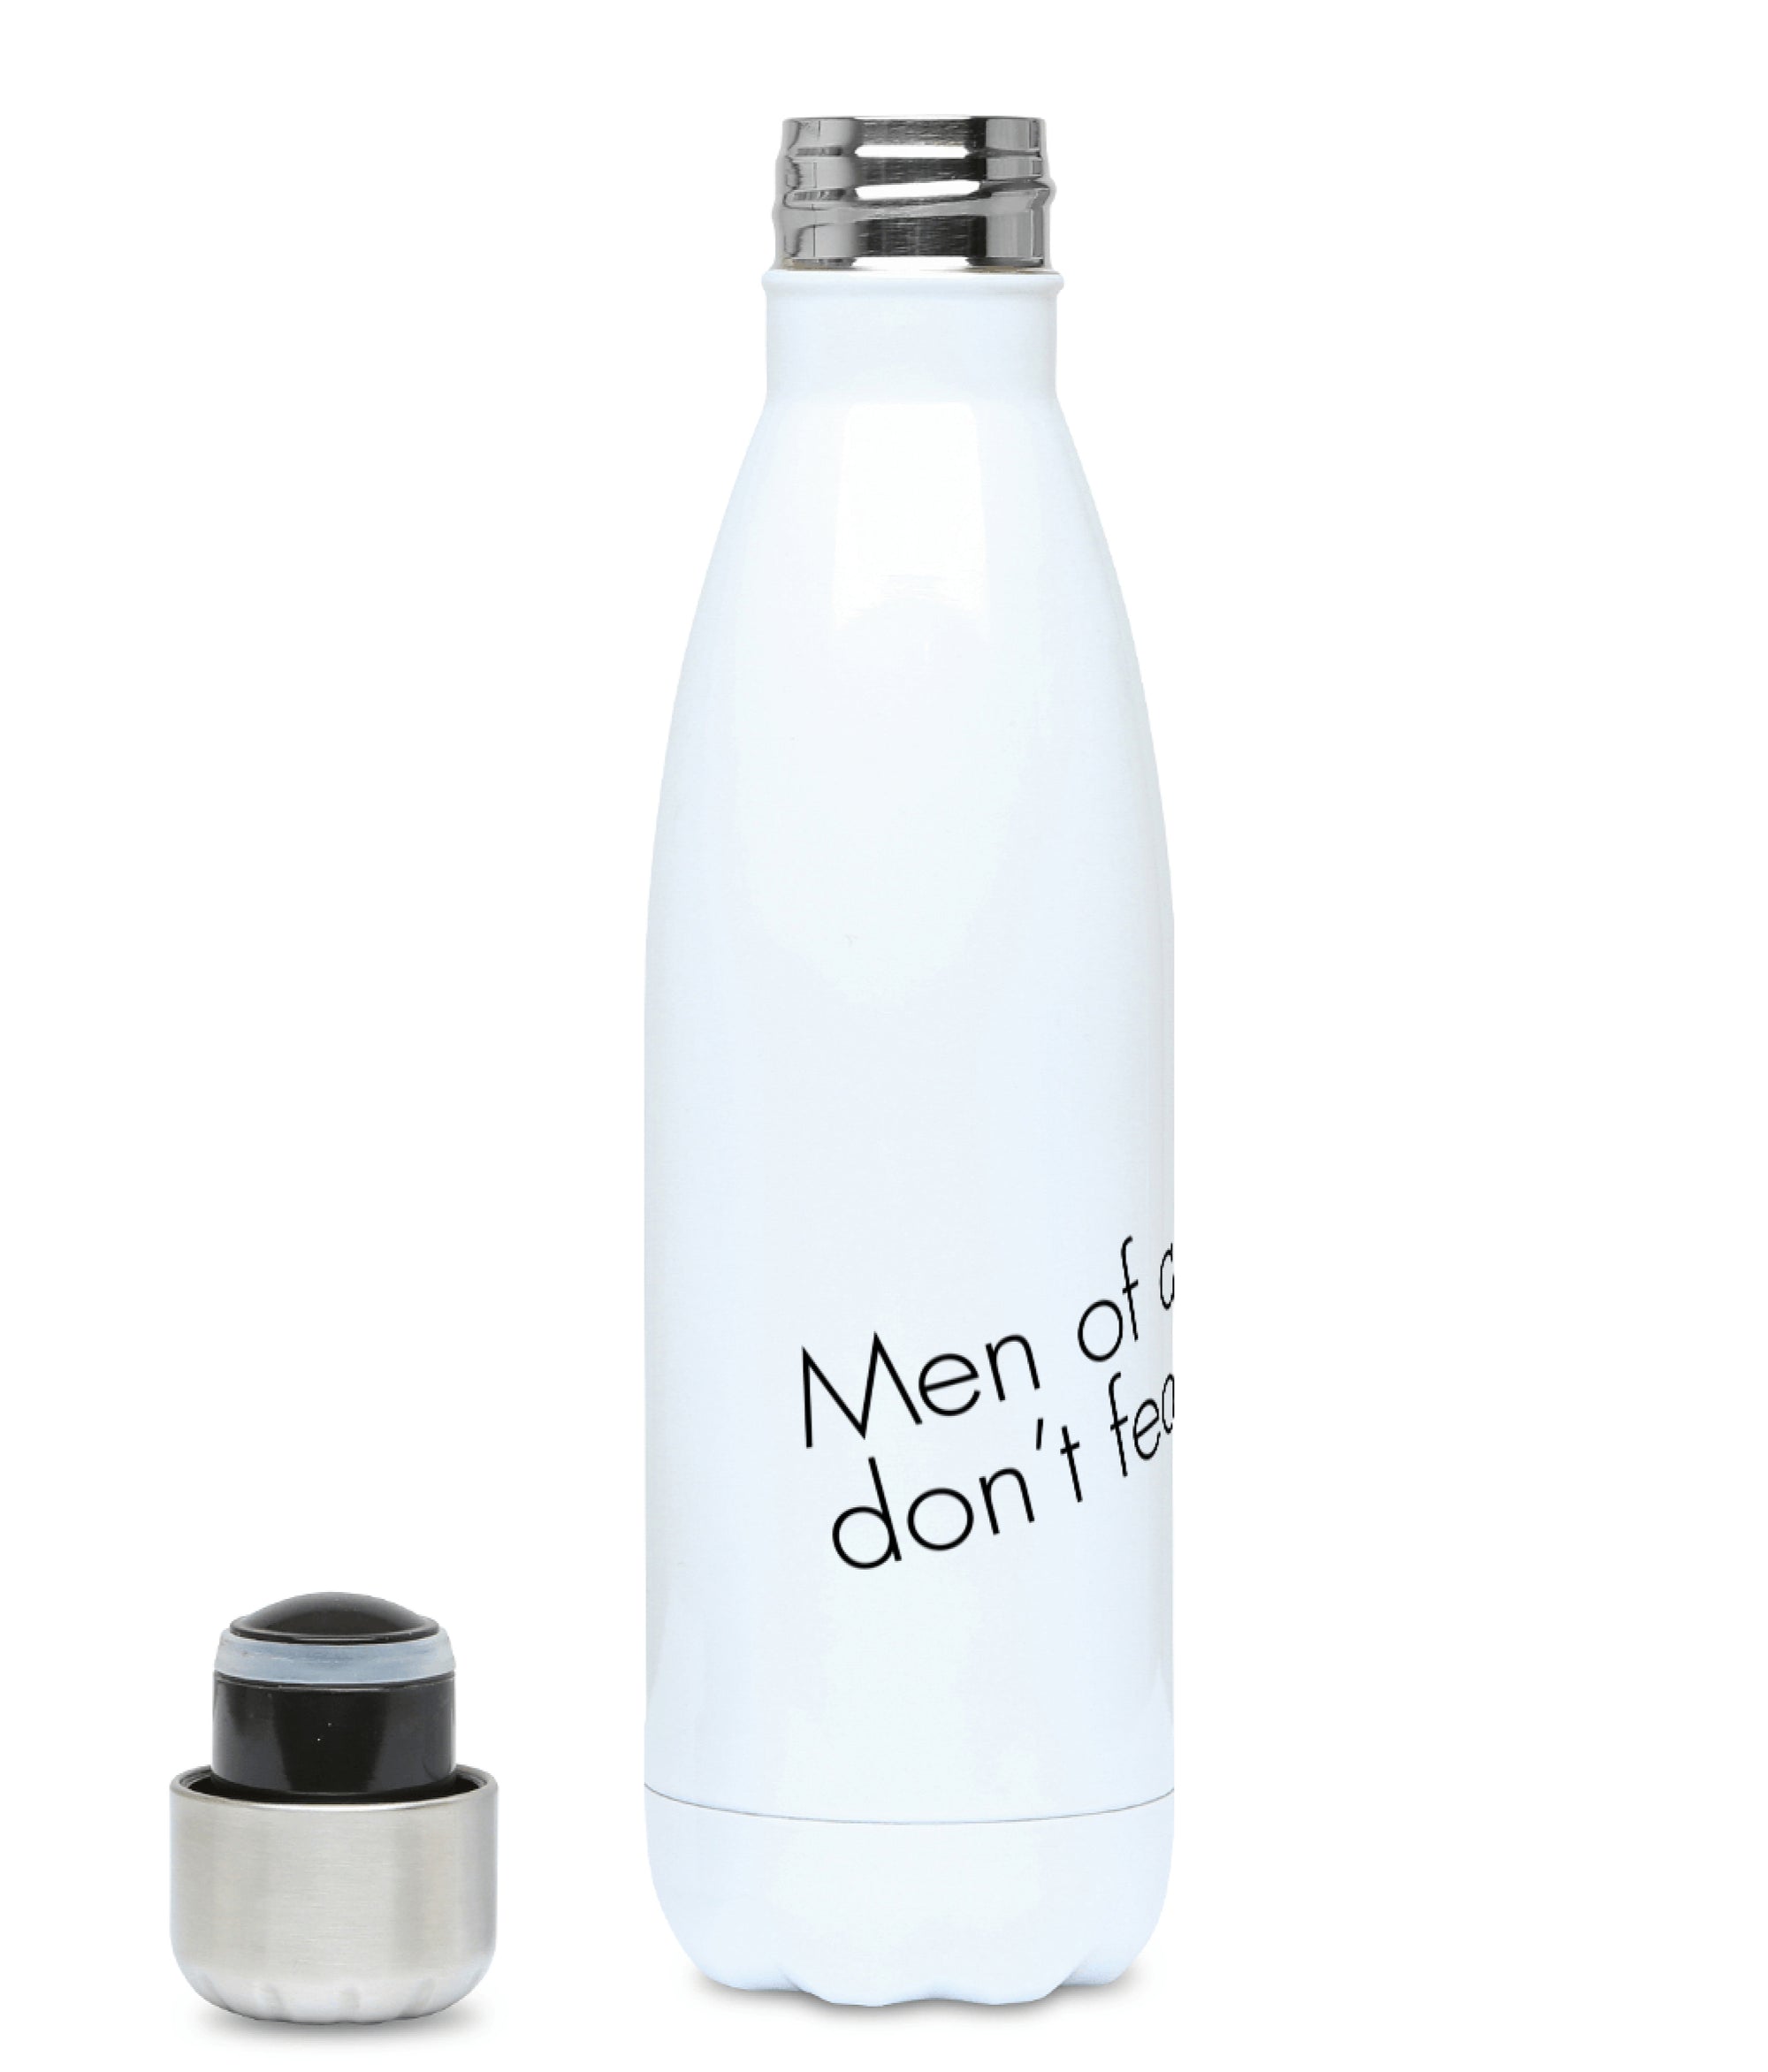 Feminist Water Bottle - Men Of Quality Don't Fear Equality - Front